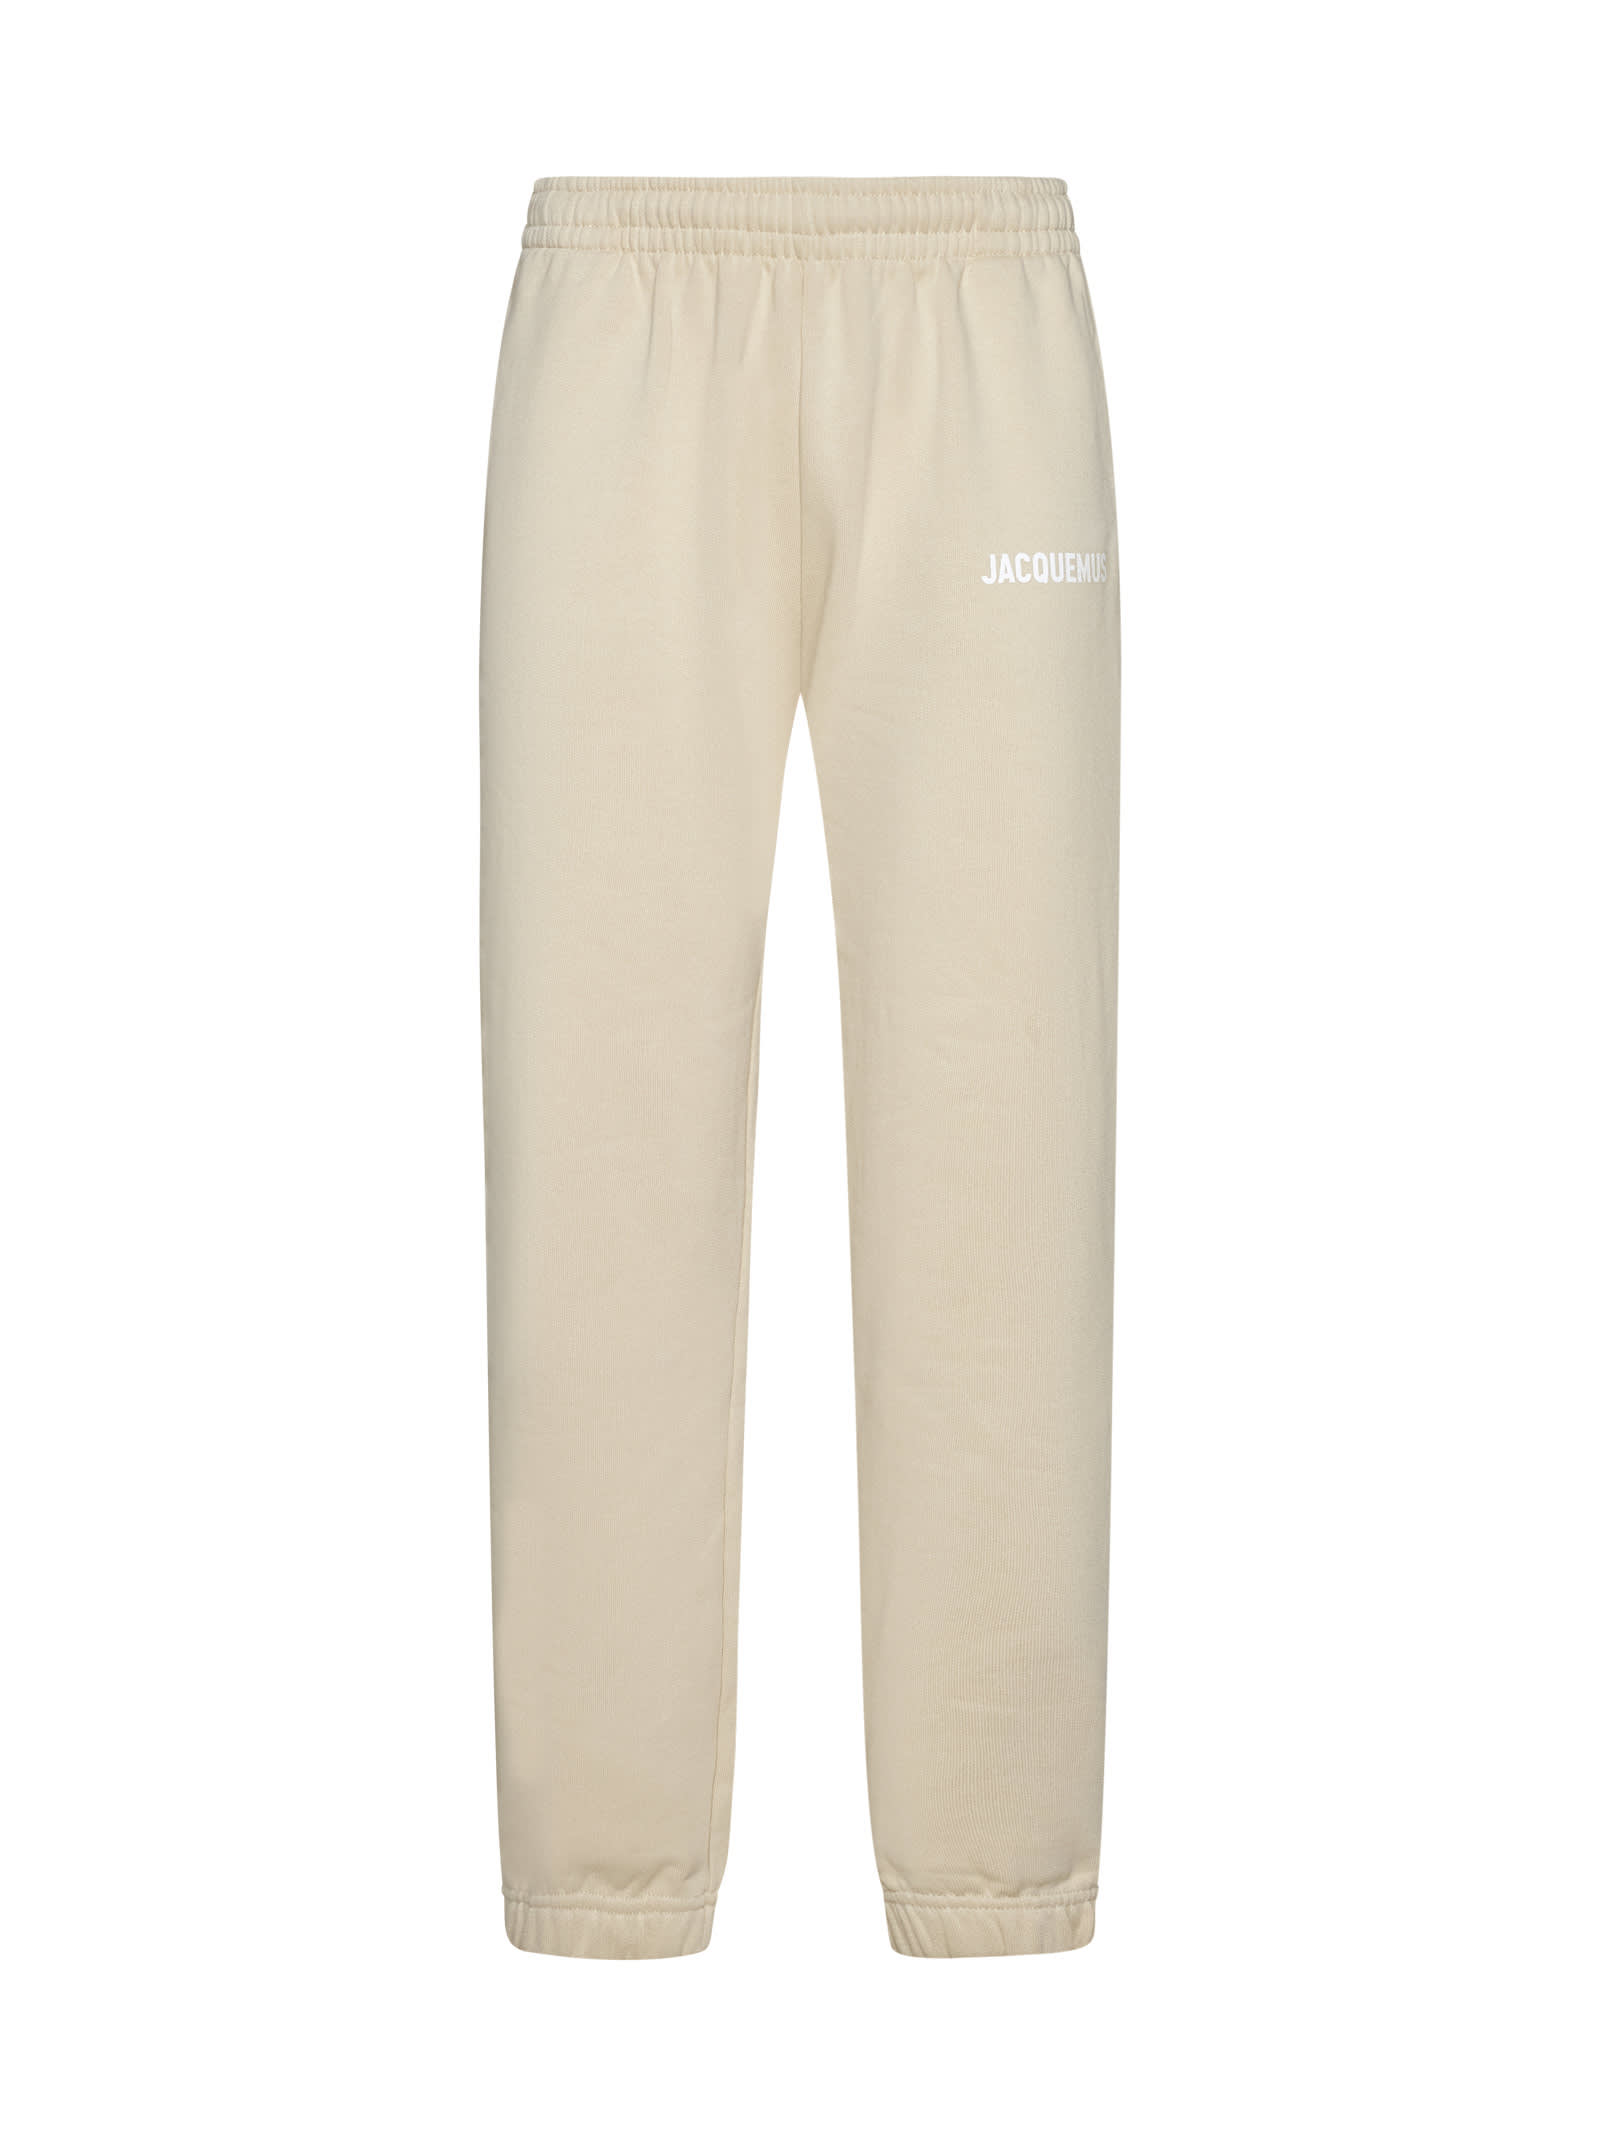 Jacquemus Pants In Neutral